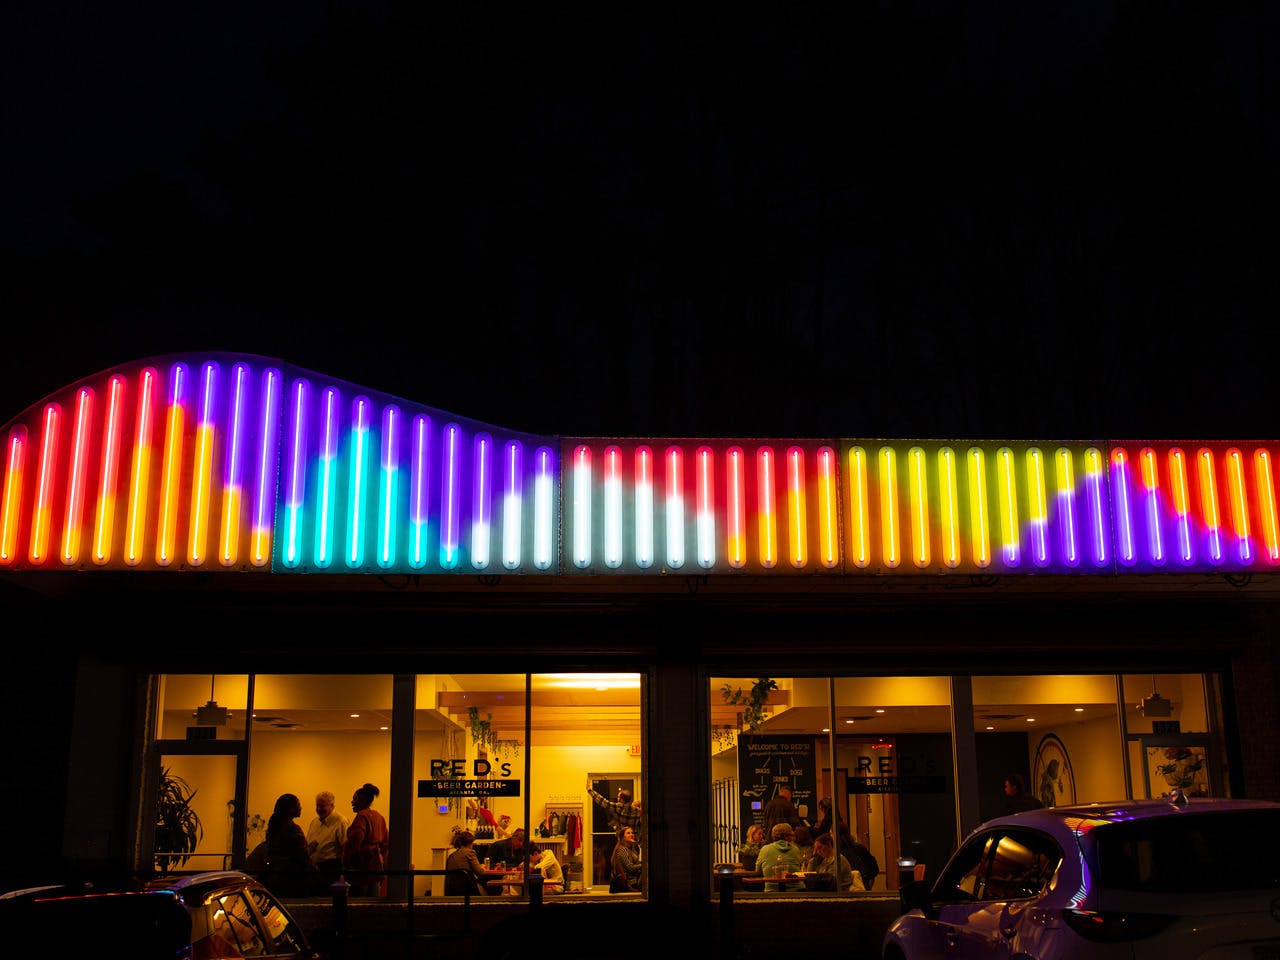 The exterior of a building at night that has colorful lights in a whimsical pattern above it.